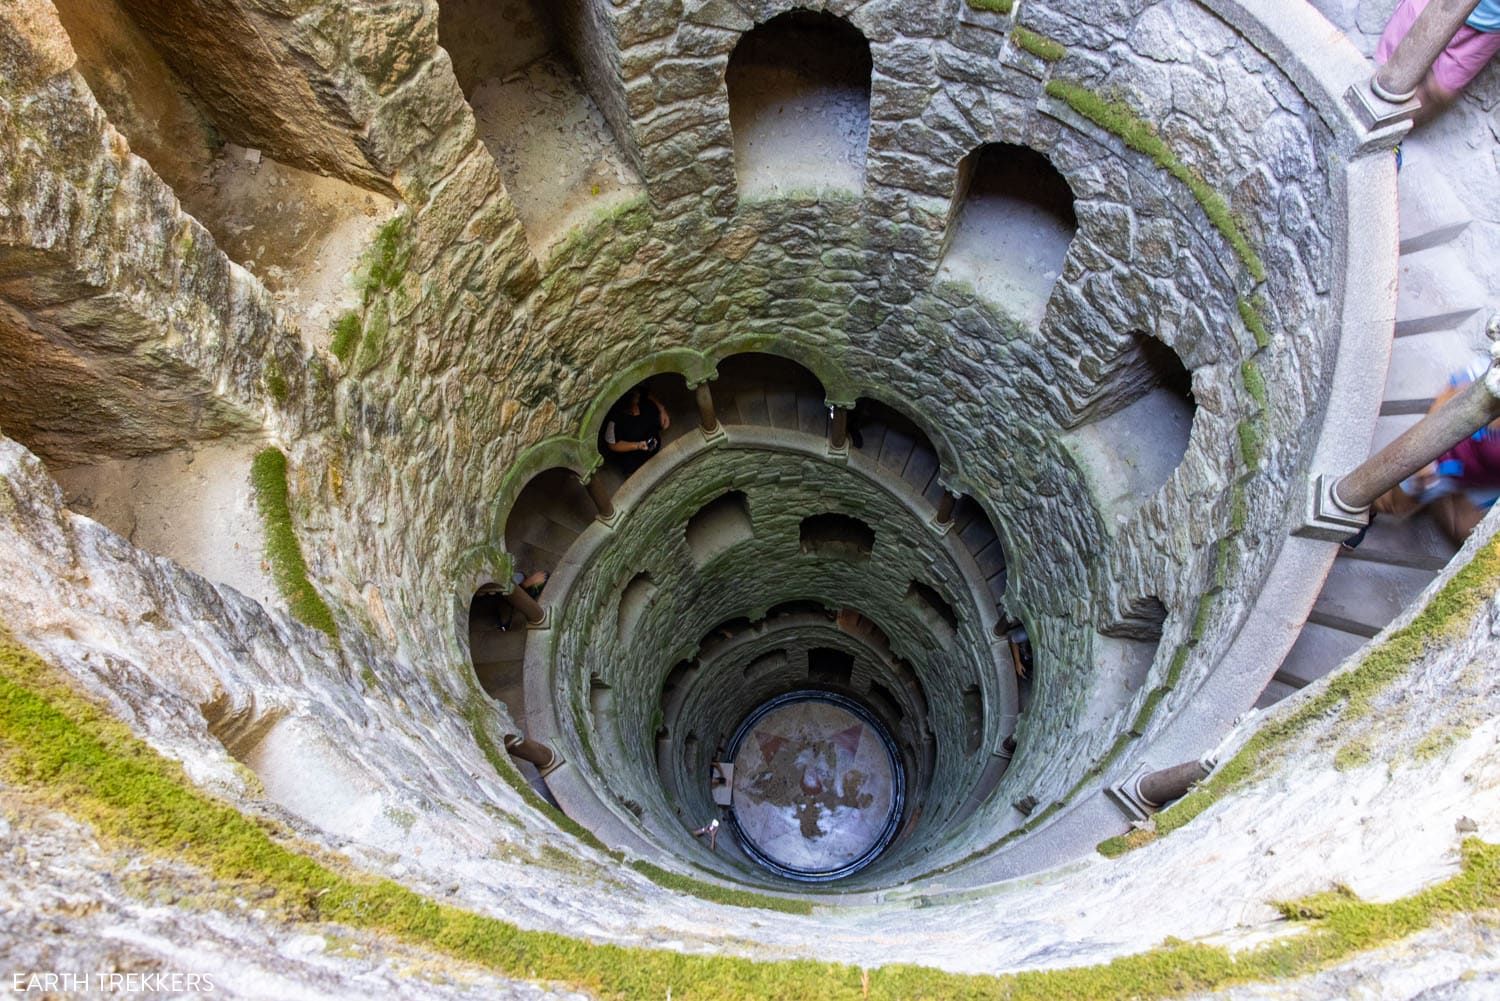 Initiation Well Sintra Portugal | Best Things to Do in Sintra